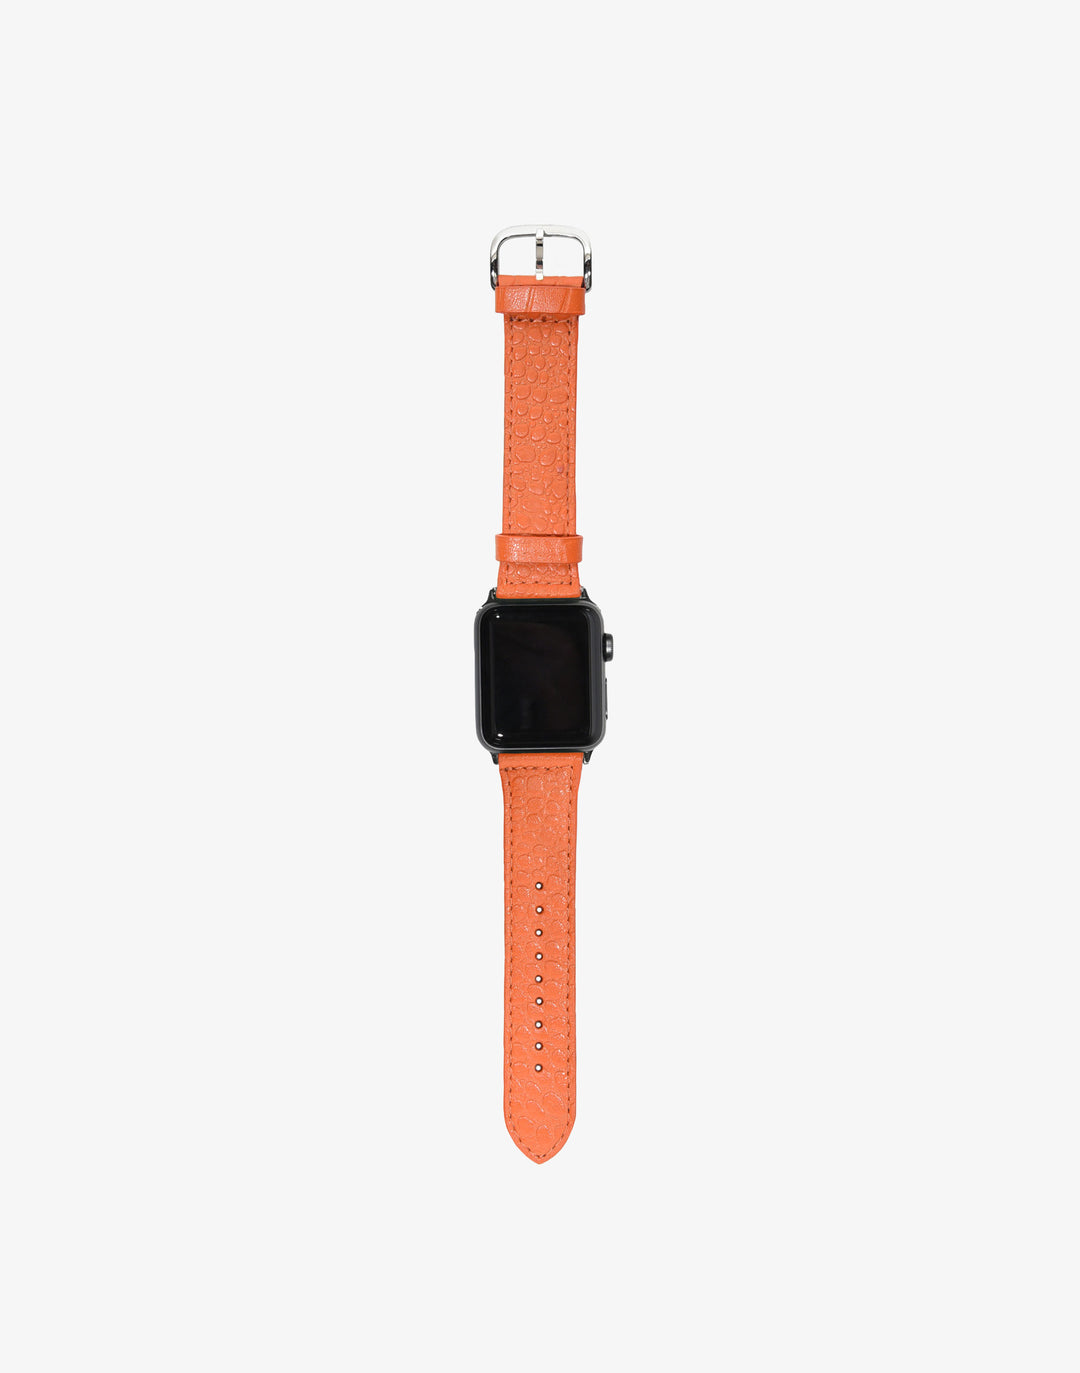 Hyer Goods recycled leather Apple Watch Band orange croc #color_flame-croc